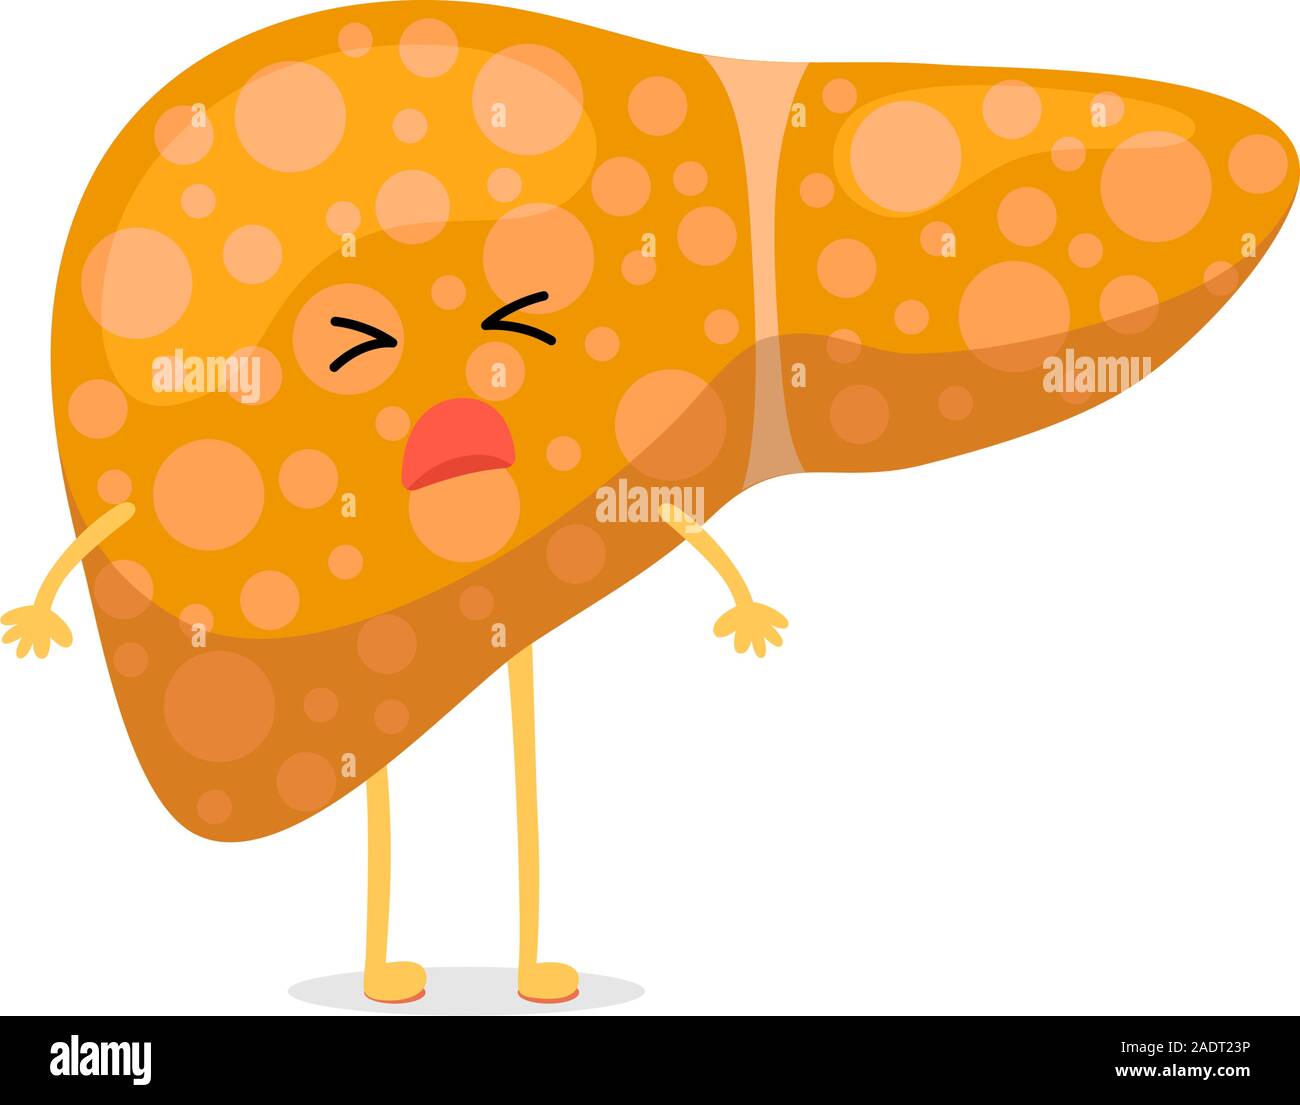 Sick unhealthy cartoon liver character suffers from jaundice or hepatitis and suffering pain. Human exocrine gland organ destruction concept. Vector hepatic illustration Stock Vector